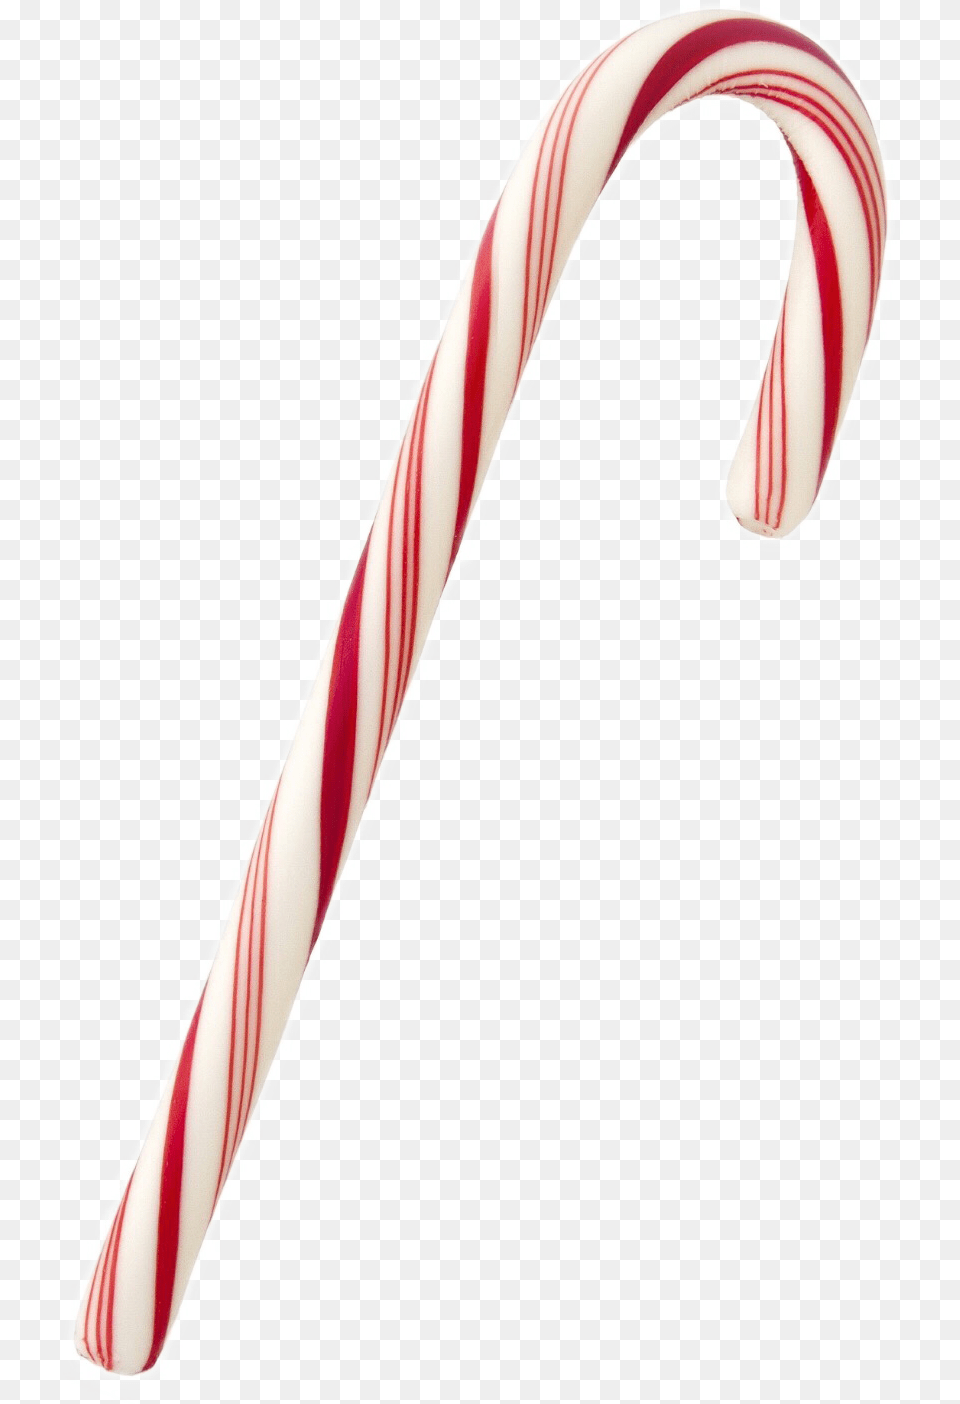 Candycane Christmas Holiday Peppermint Candy Candy Cane, Food, Sweets, Stick, Blade Free Png Download